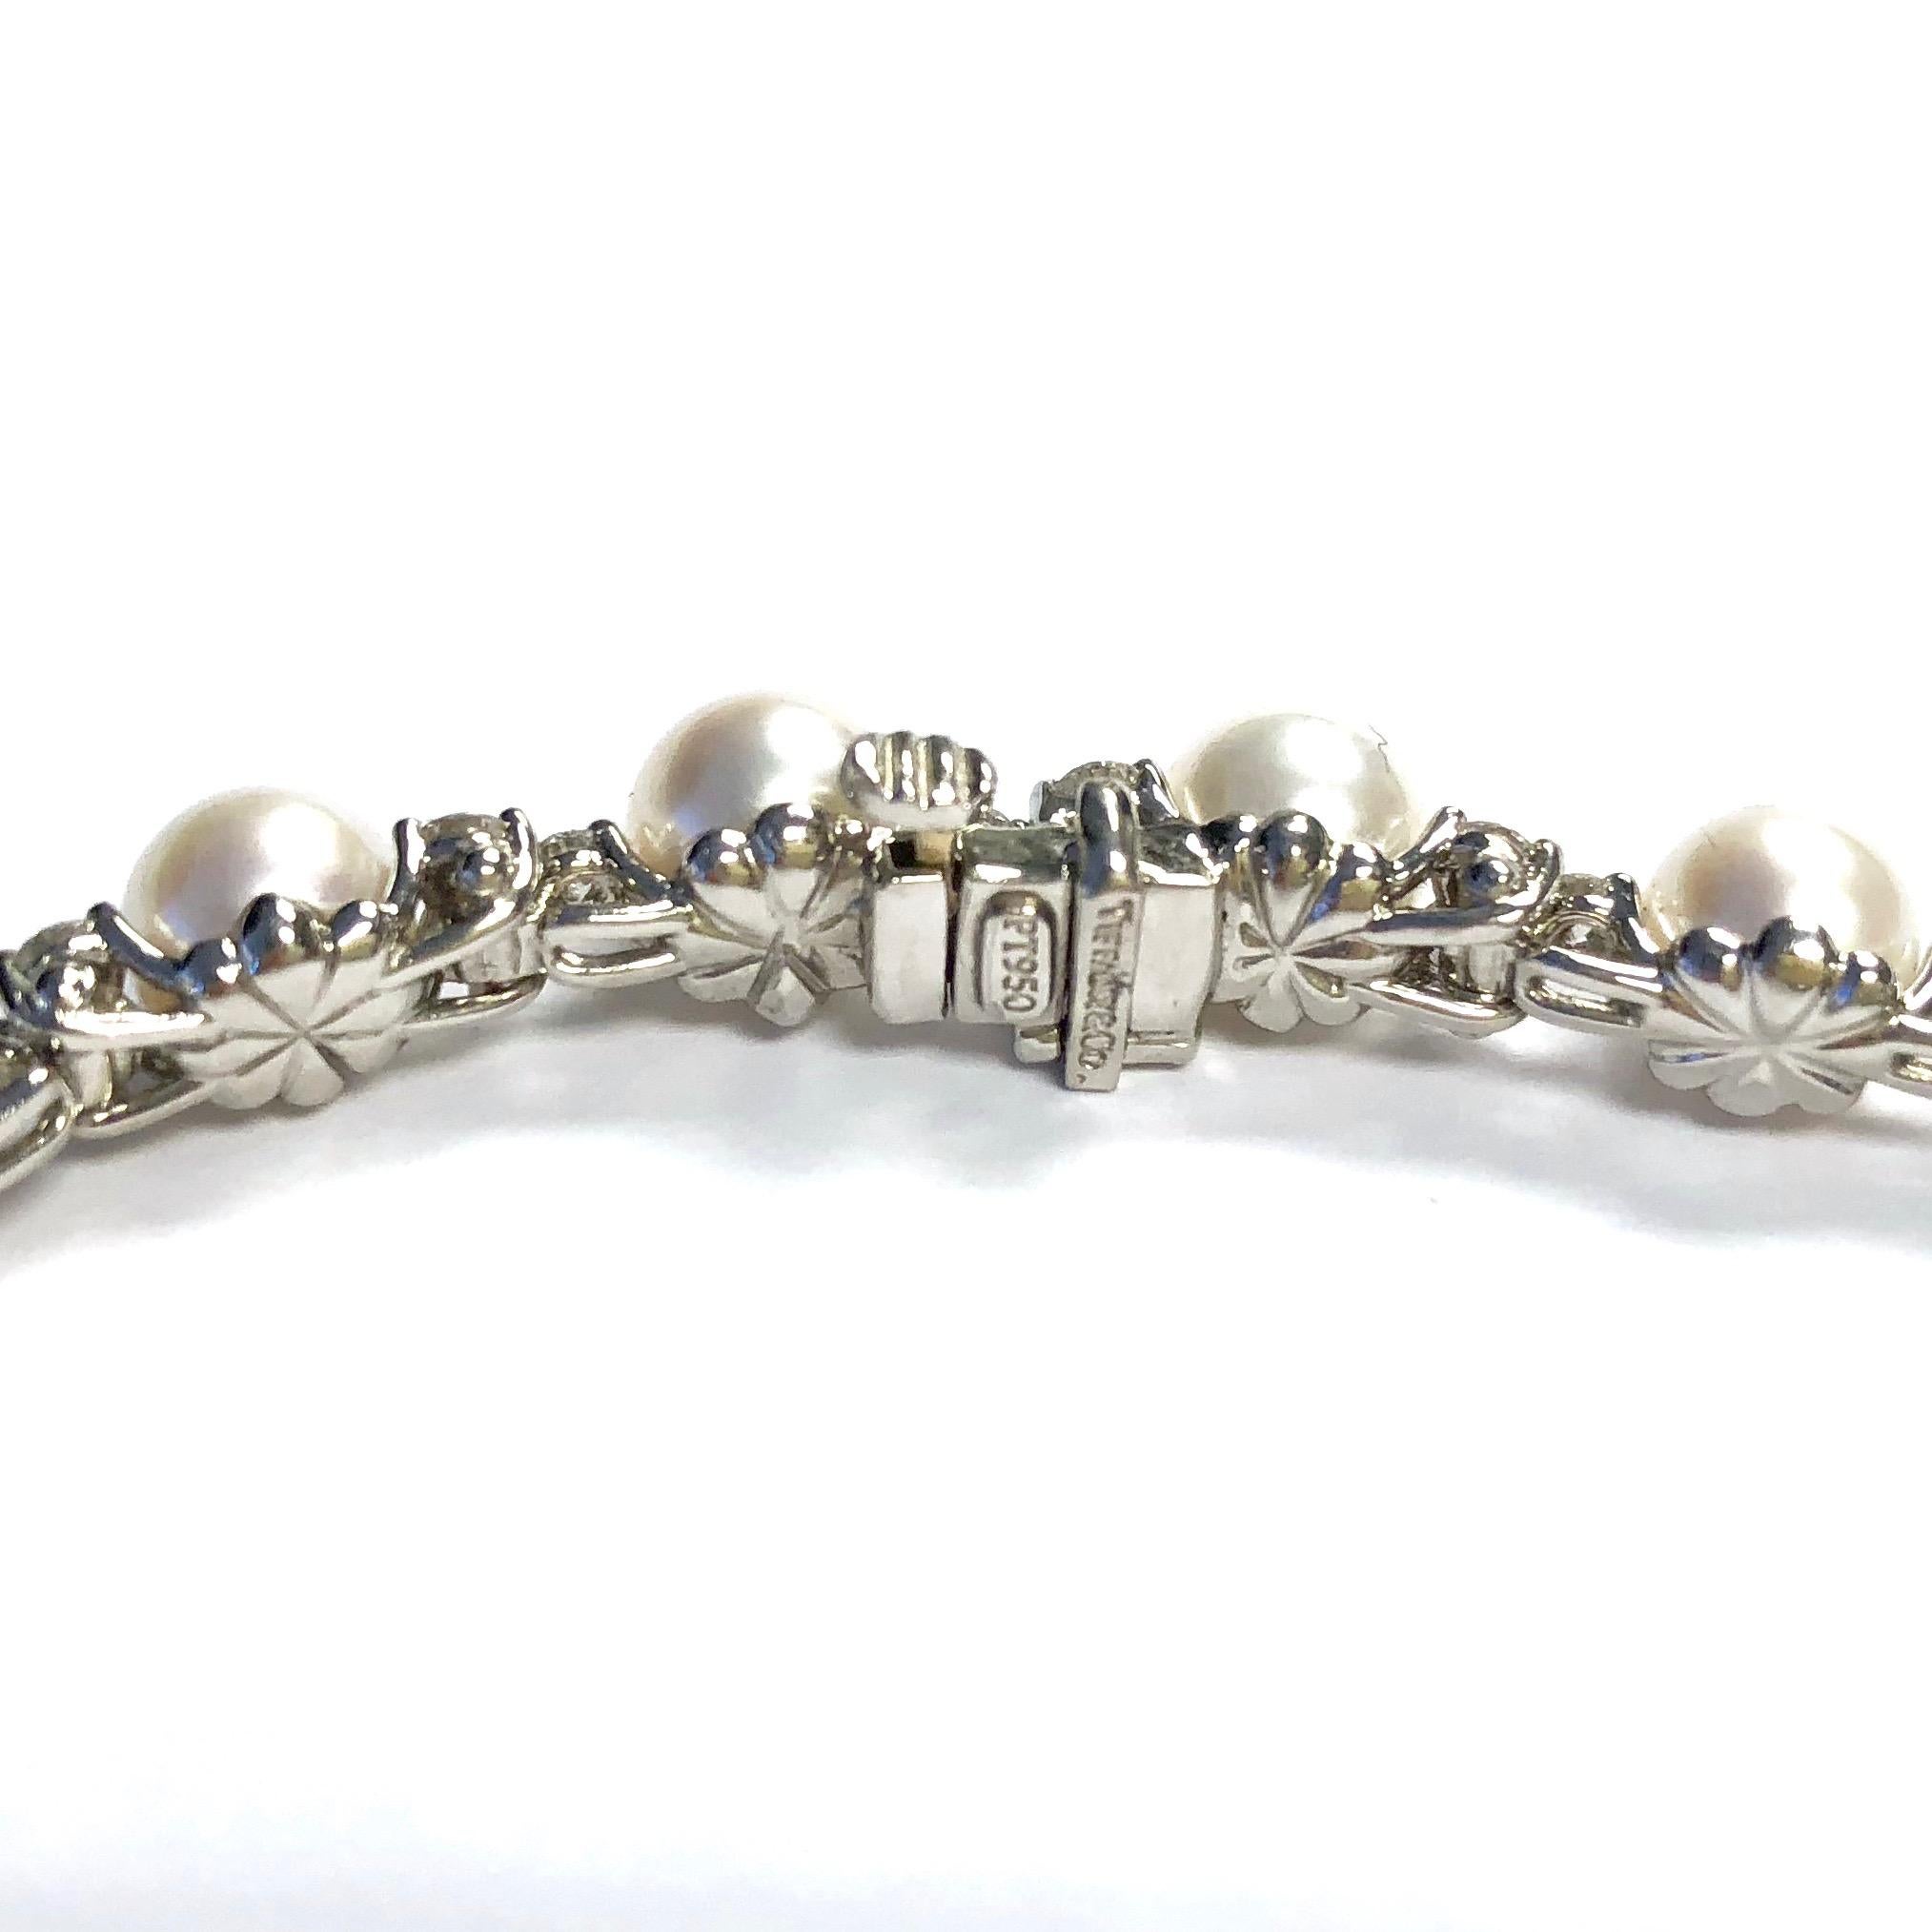 Tiffany & Co. Platinum  Aria Akoya cultured pearls and round brilliant diamonds bracelet. 
16 Pearls measuring 6.5-7mm in diameter.
Total diamond weight: 2.18ct.
Length: 7 inches
Current retail price: $15,000 + Tax
Condition: Excellent, like new. 